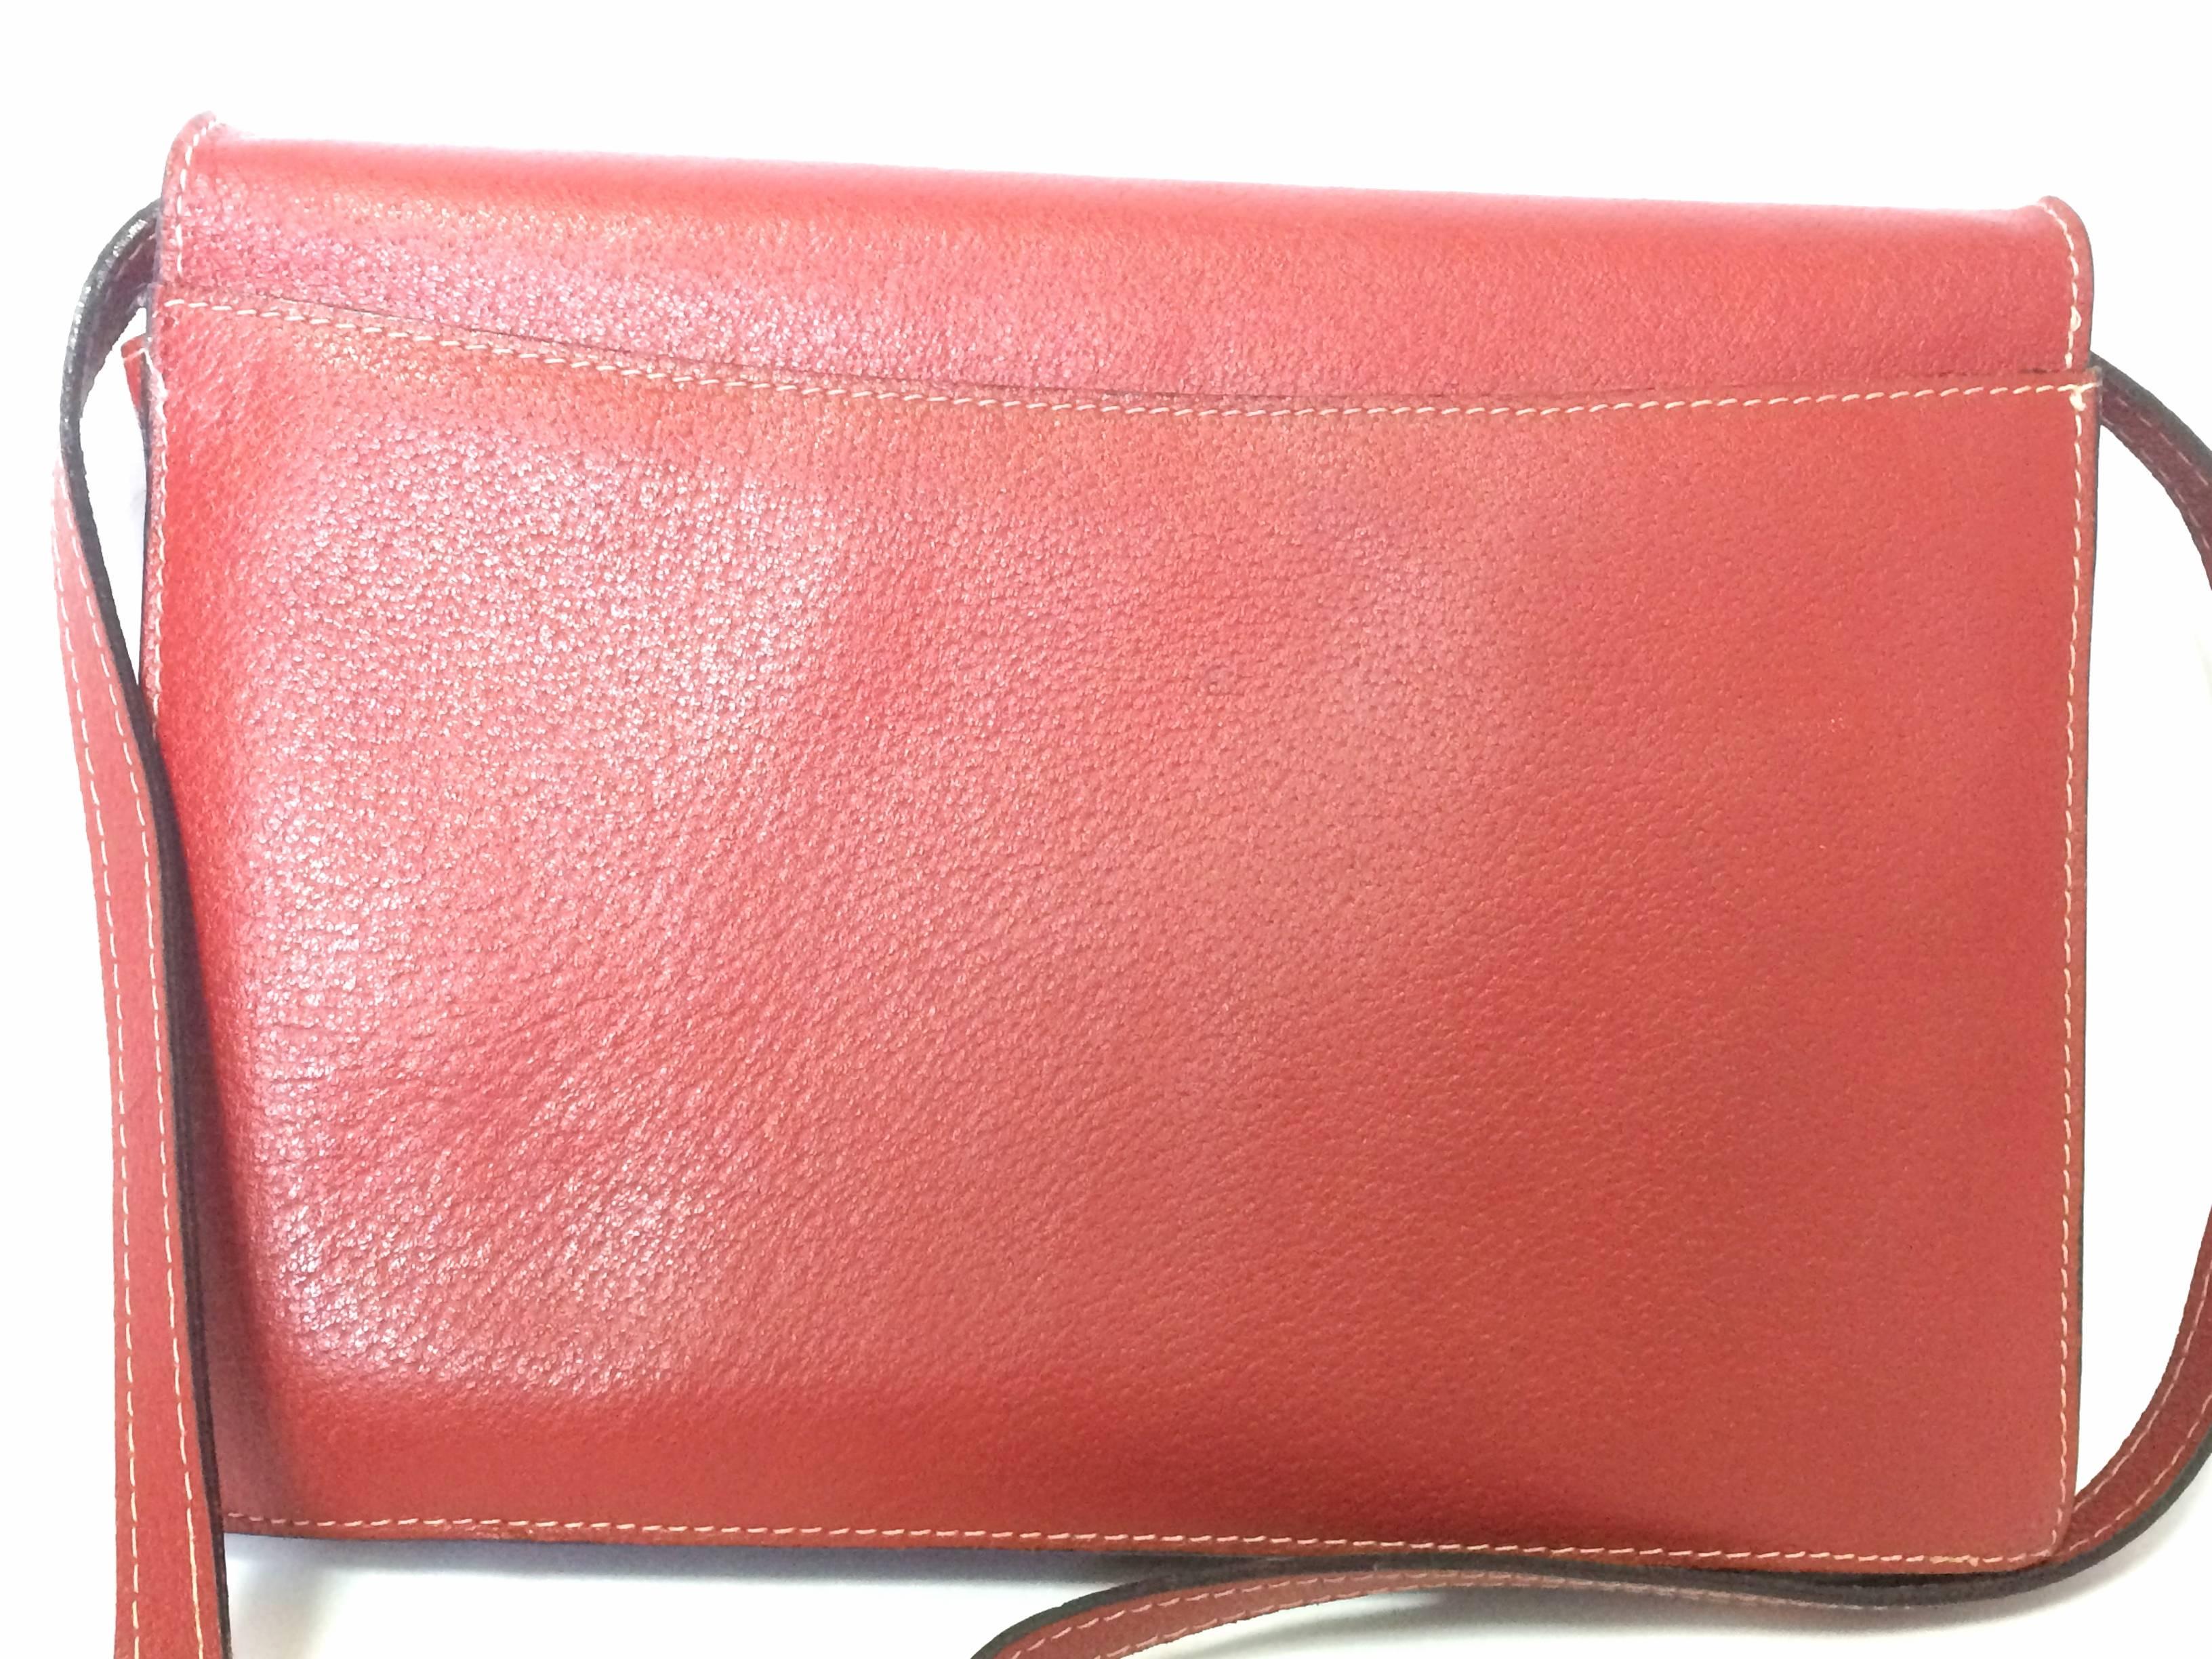 1980s. Vintage Valentino Garavani red pigskin shoulder clutch bag with unique logo stitch mark.

This is a vintage Valentino Garavani red pigskin leather back in the era.
Classic style that fits any occasions.
Featuring a unique logo stitch mark